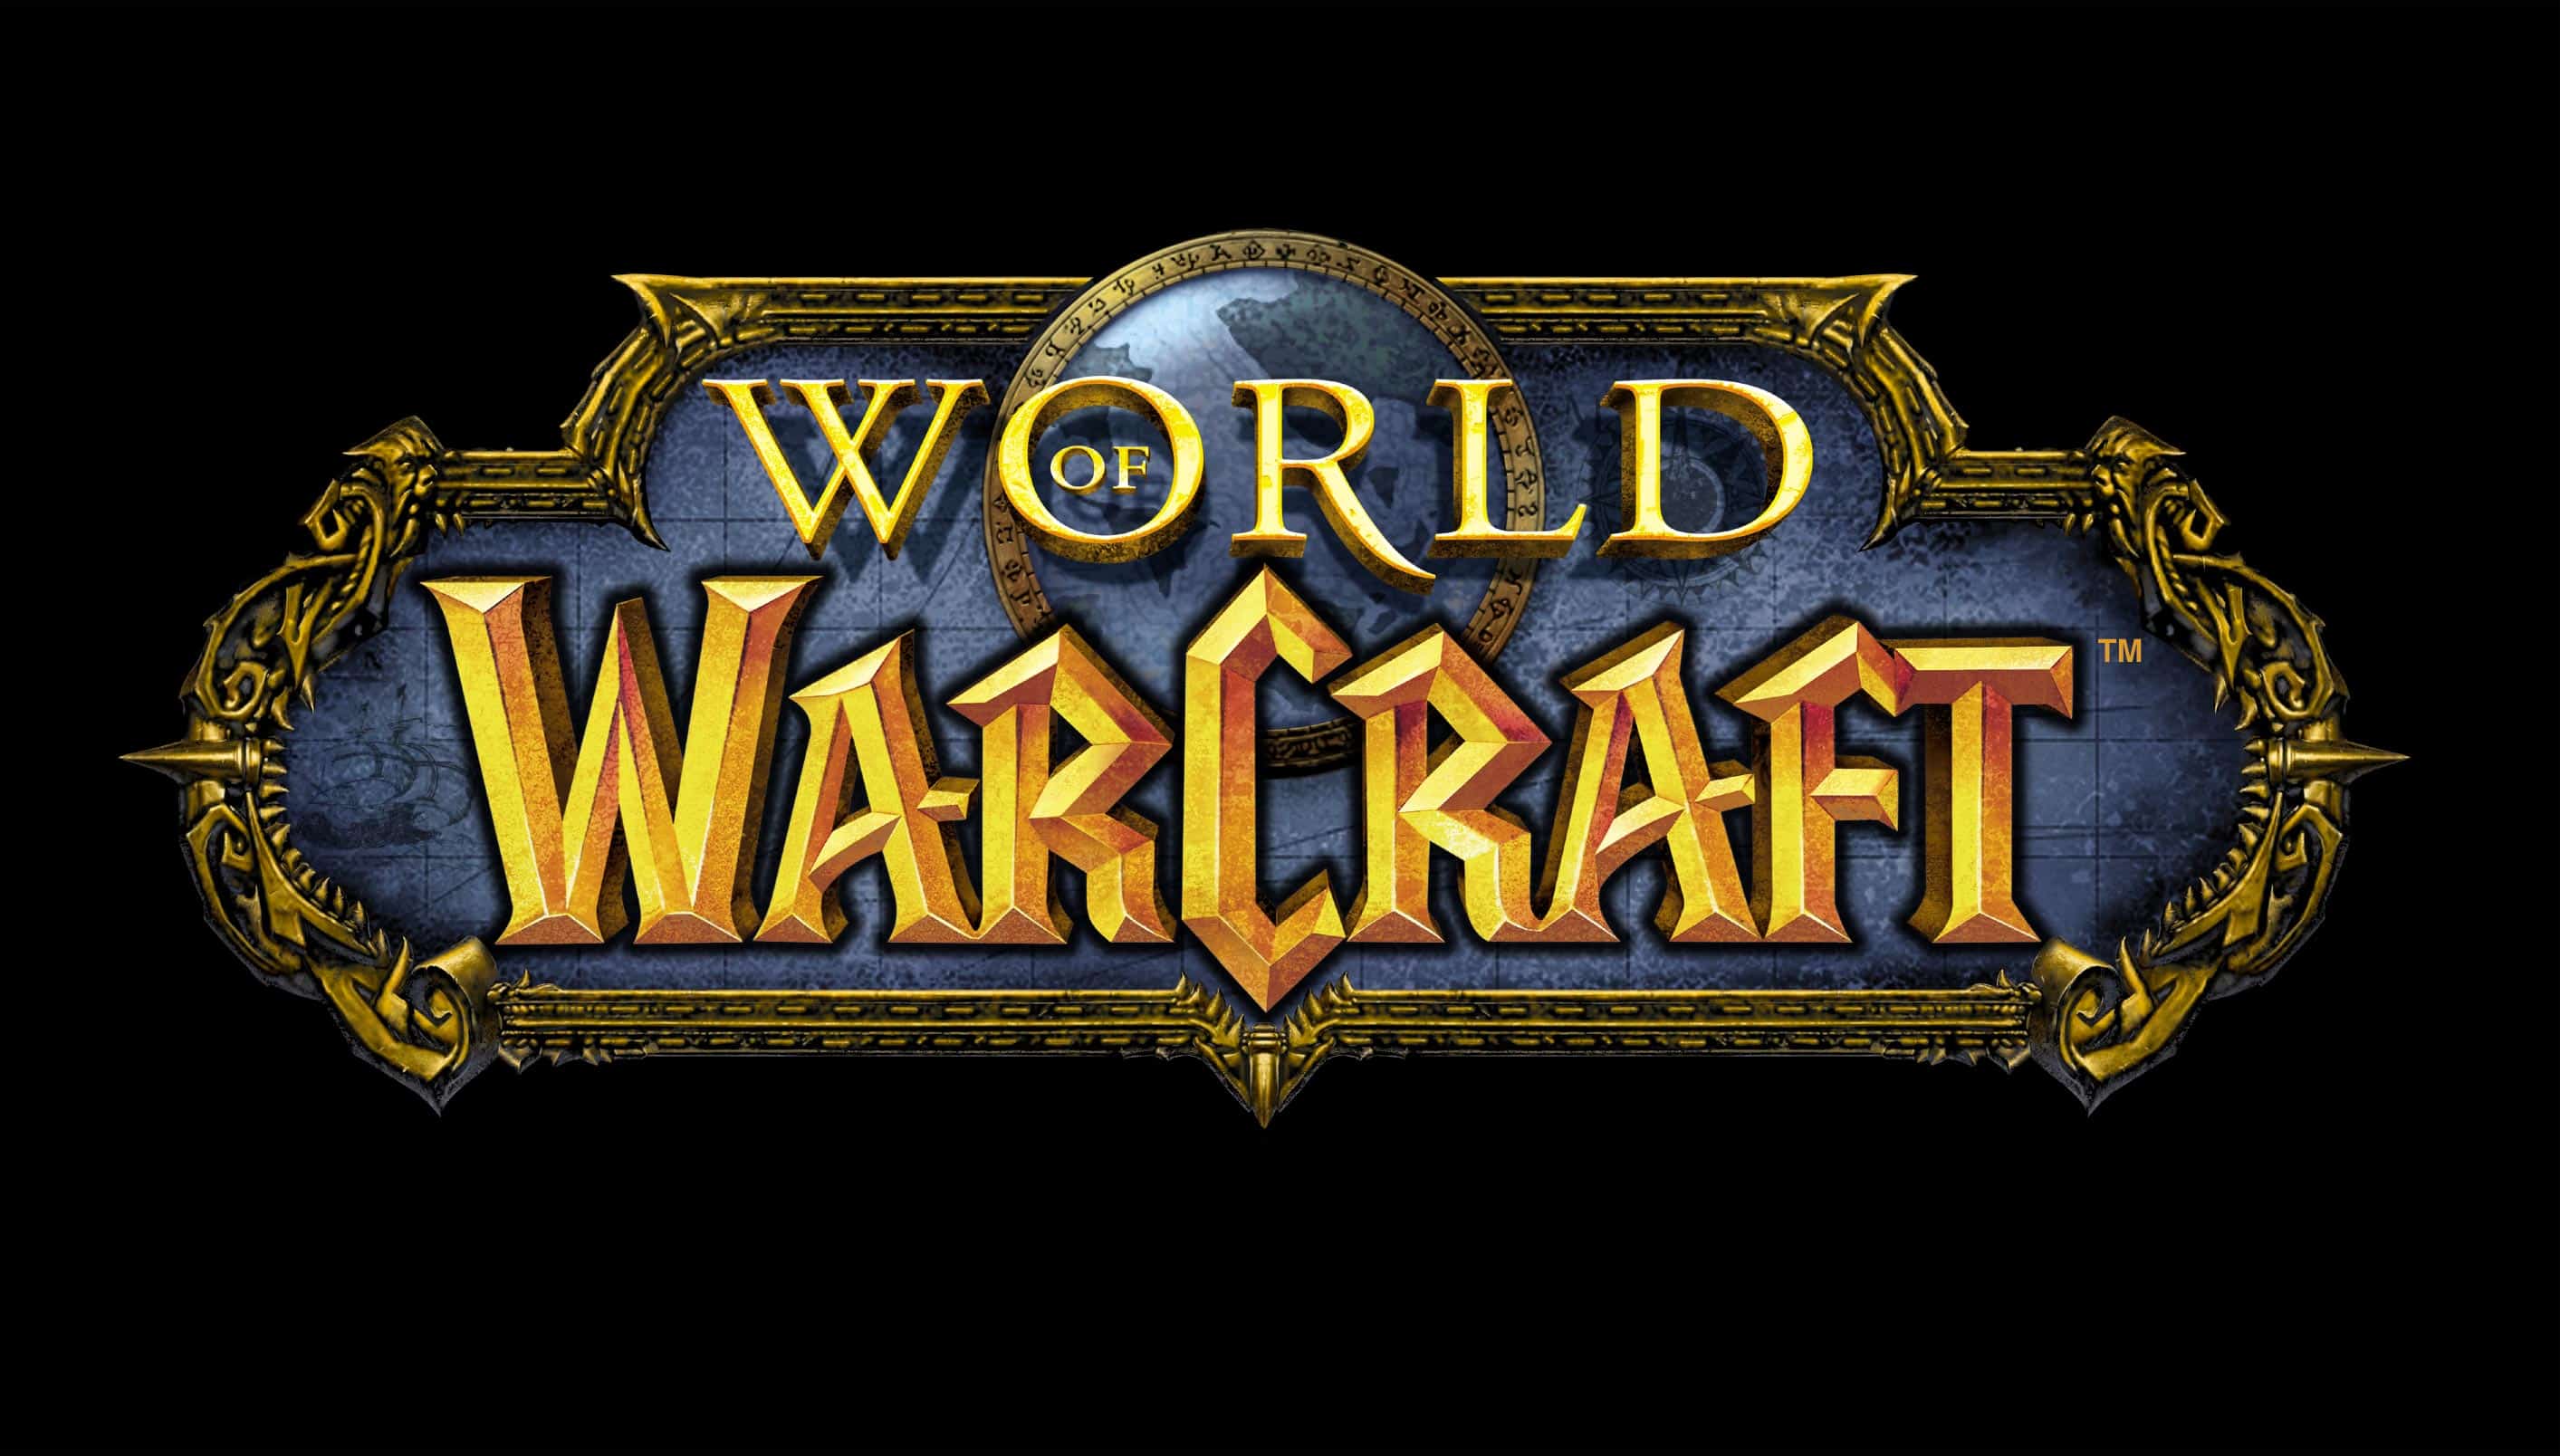 Can you play World of Warcraft on cloud gaming services?